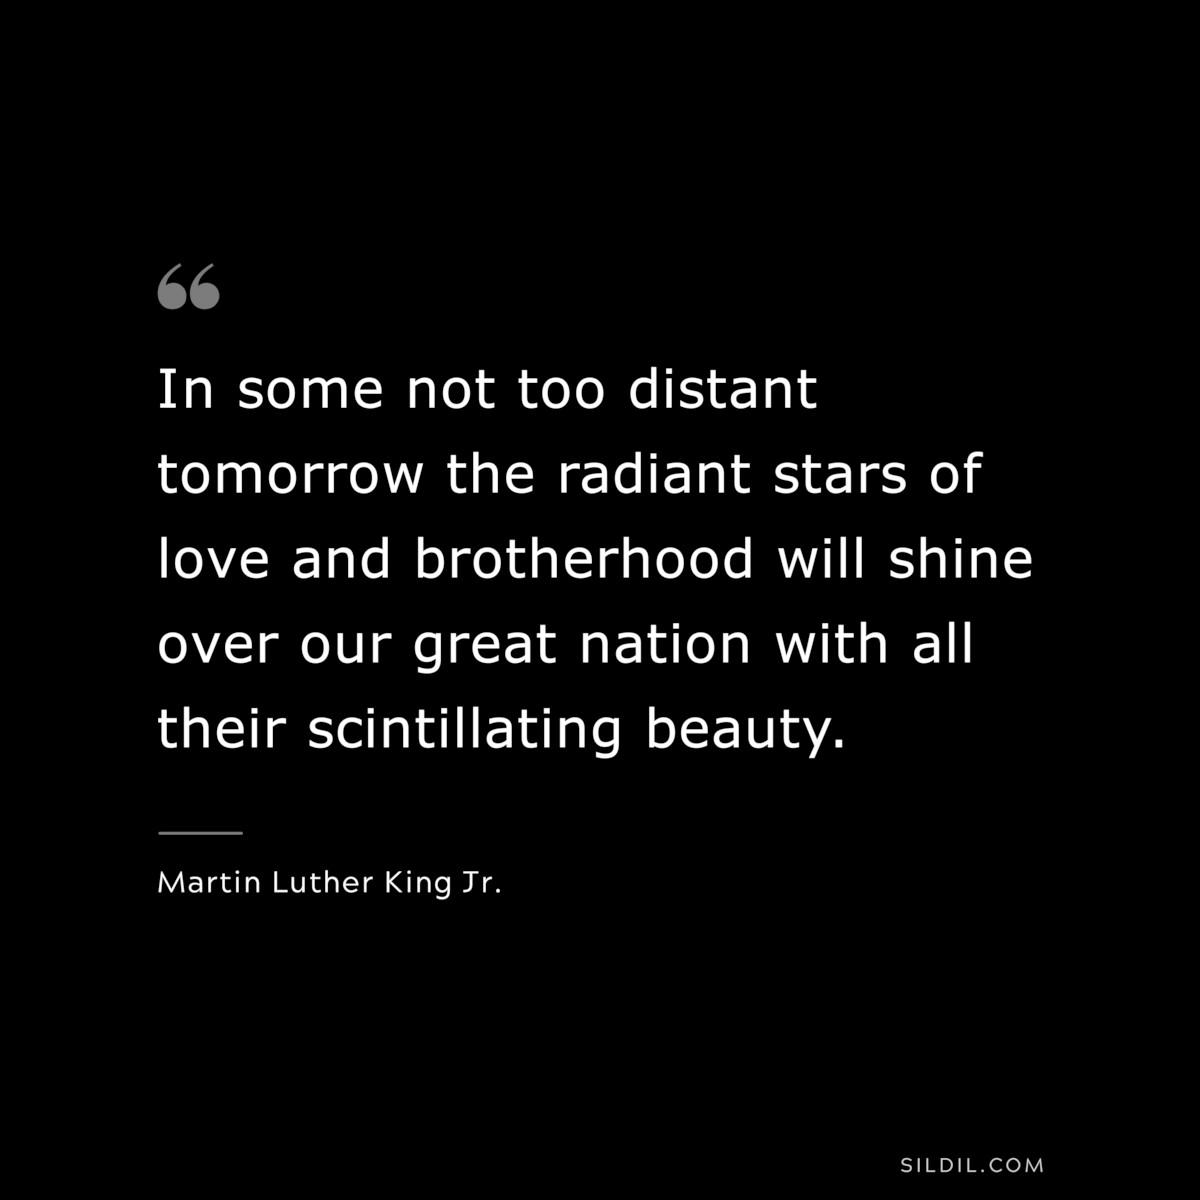 In some not too distant tomorrow the radiant stars of love and brotherhood will shine over our great nation with all their scintillating beauty. ― Martin Luther King Jr.